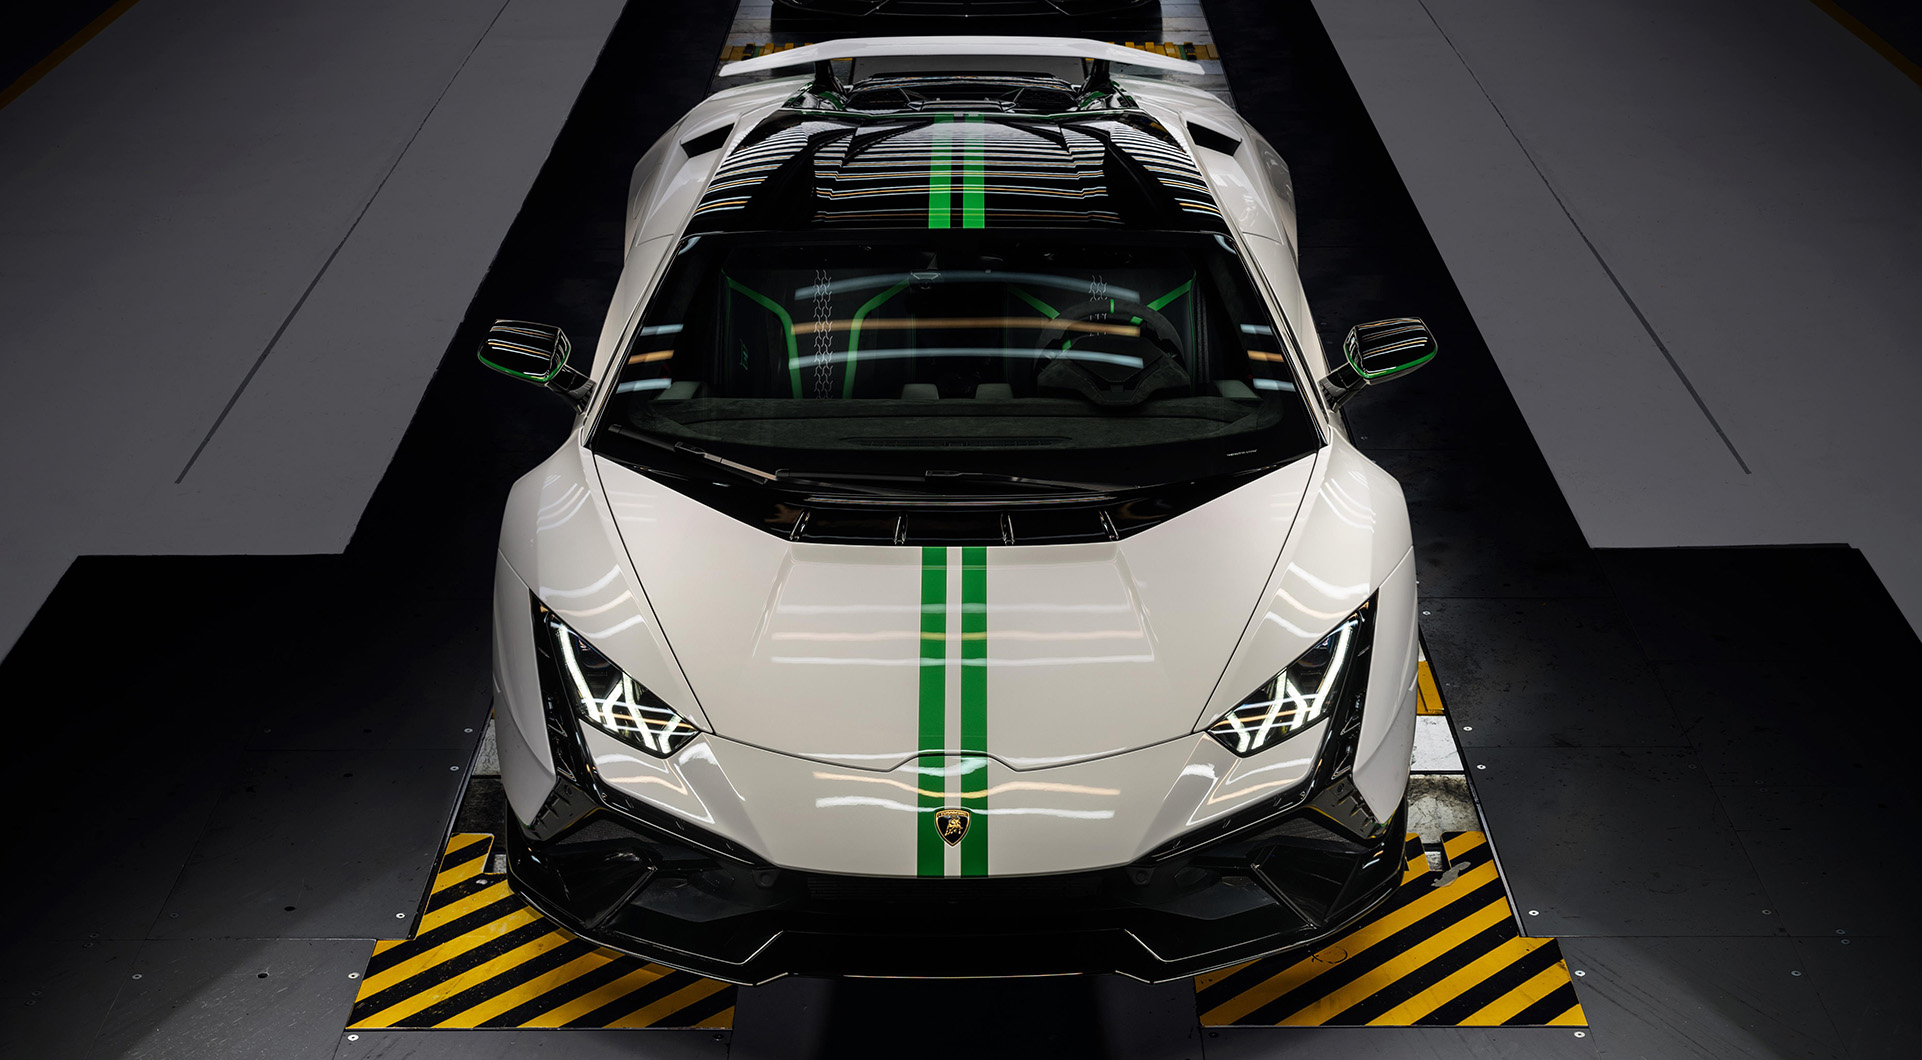 Lamborghini is set to mark its 60th anniversary with the launch of limited edition versions of the Huracán STO, Huracán Tecnica, and Huracán EVO Spyder, with 60 units of each model.